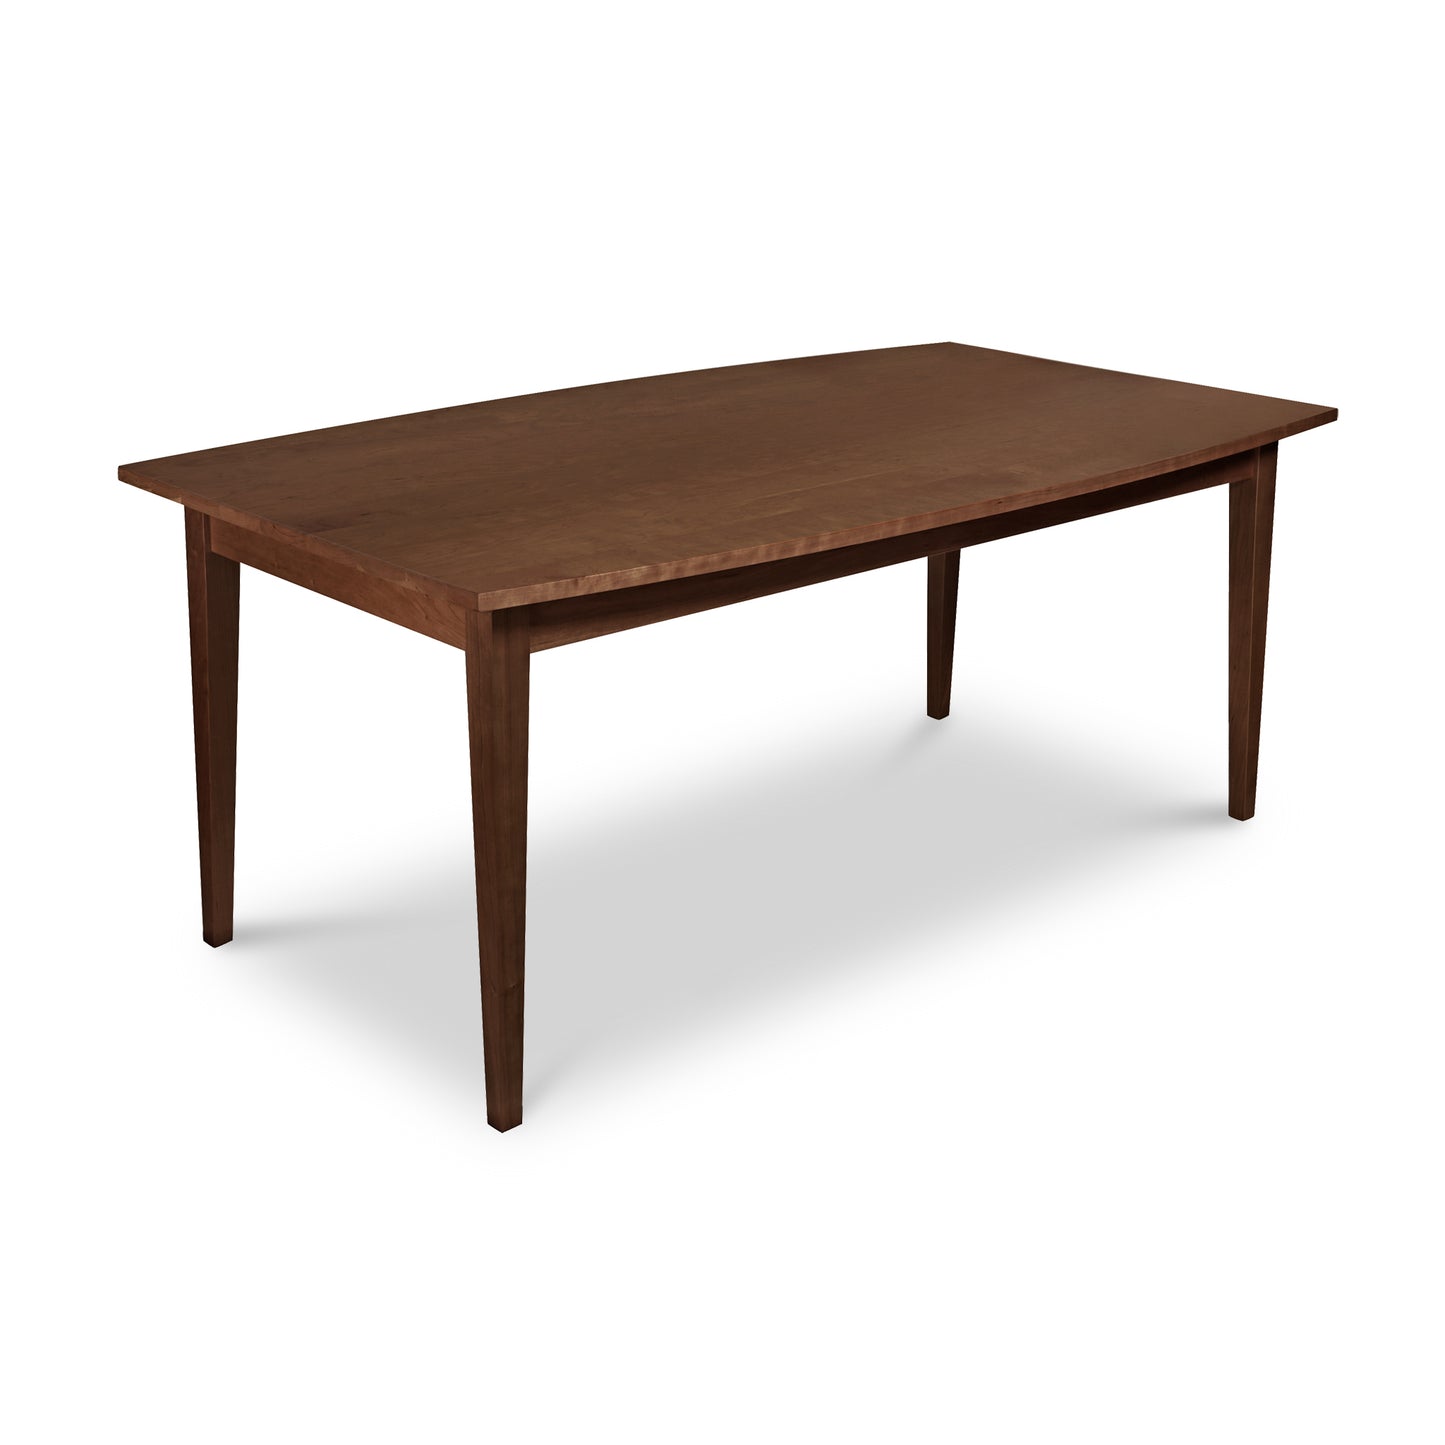 A luxury hardwood Classic Shaker Solid Boat Top Table with Shaker-style legs by Lyndon Furniture.